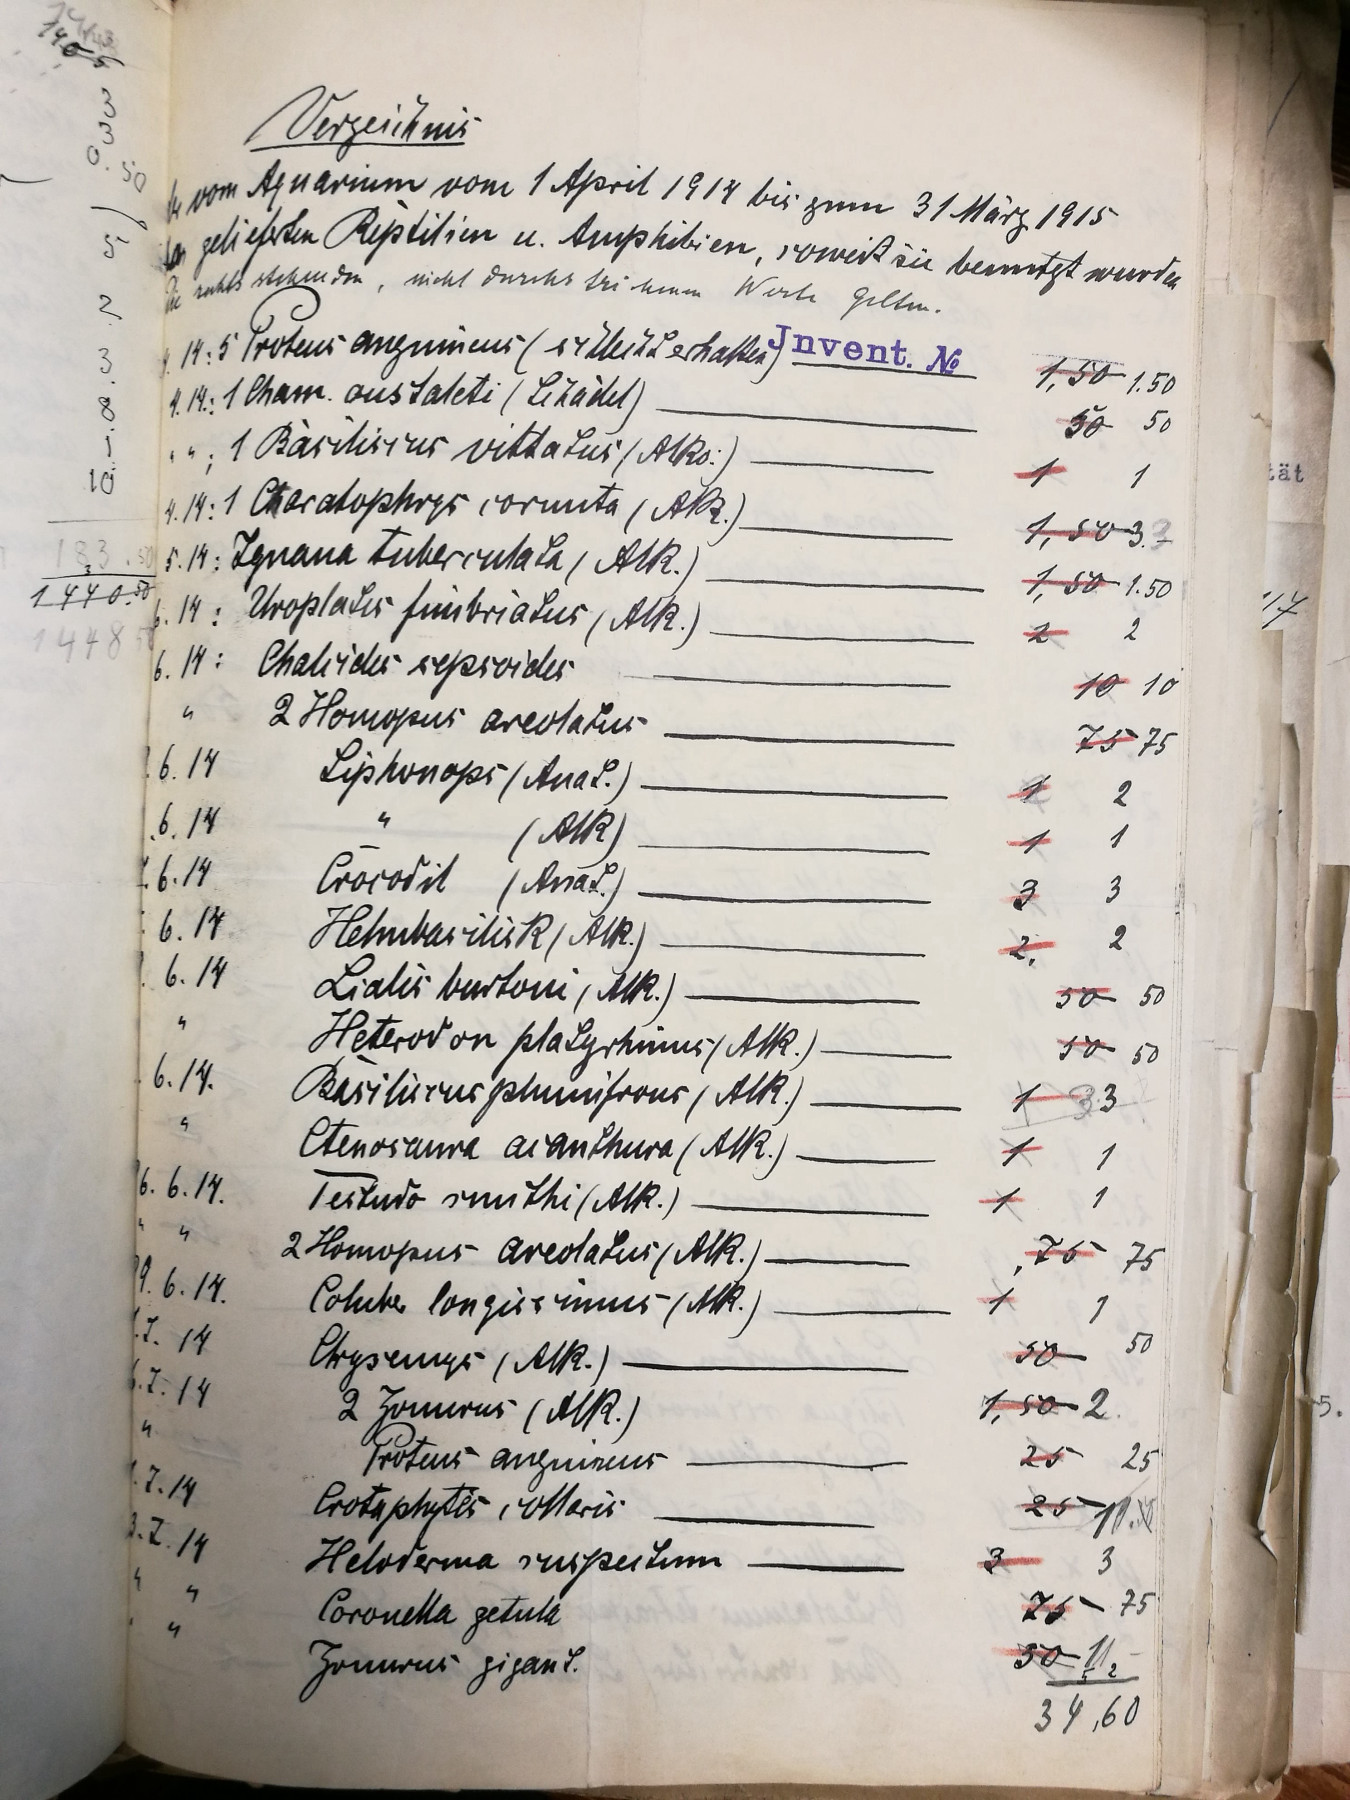 Hand-written page in a notebook with tattered edges containing a long list in old cursive handwriting with dates, species names, and sums of money on each row.